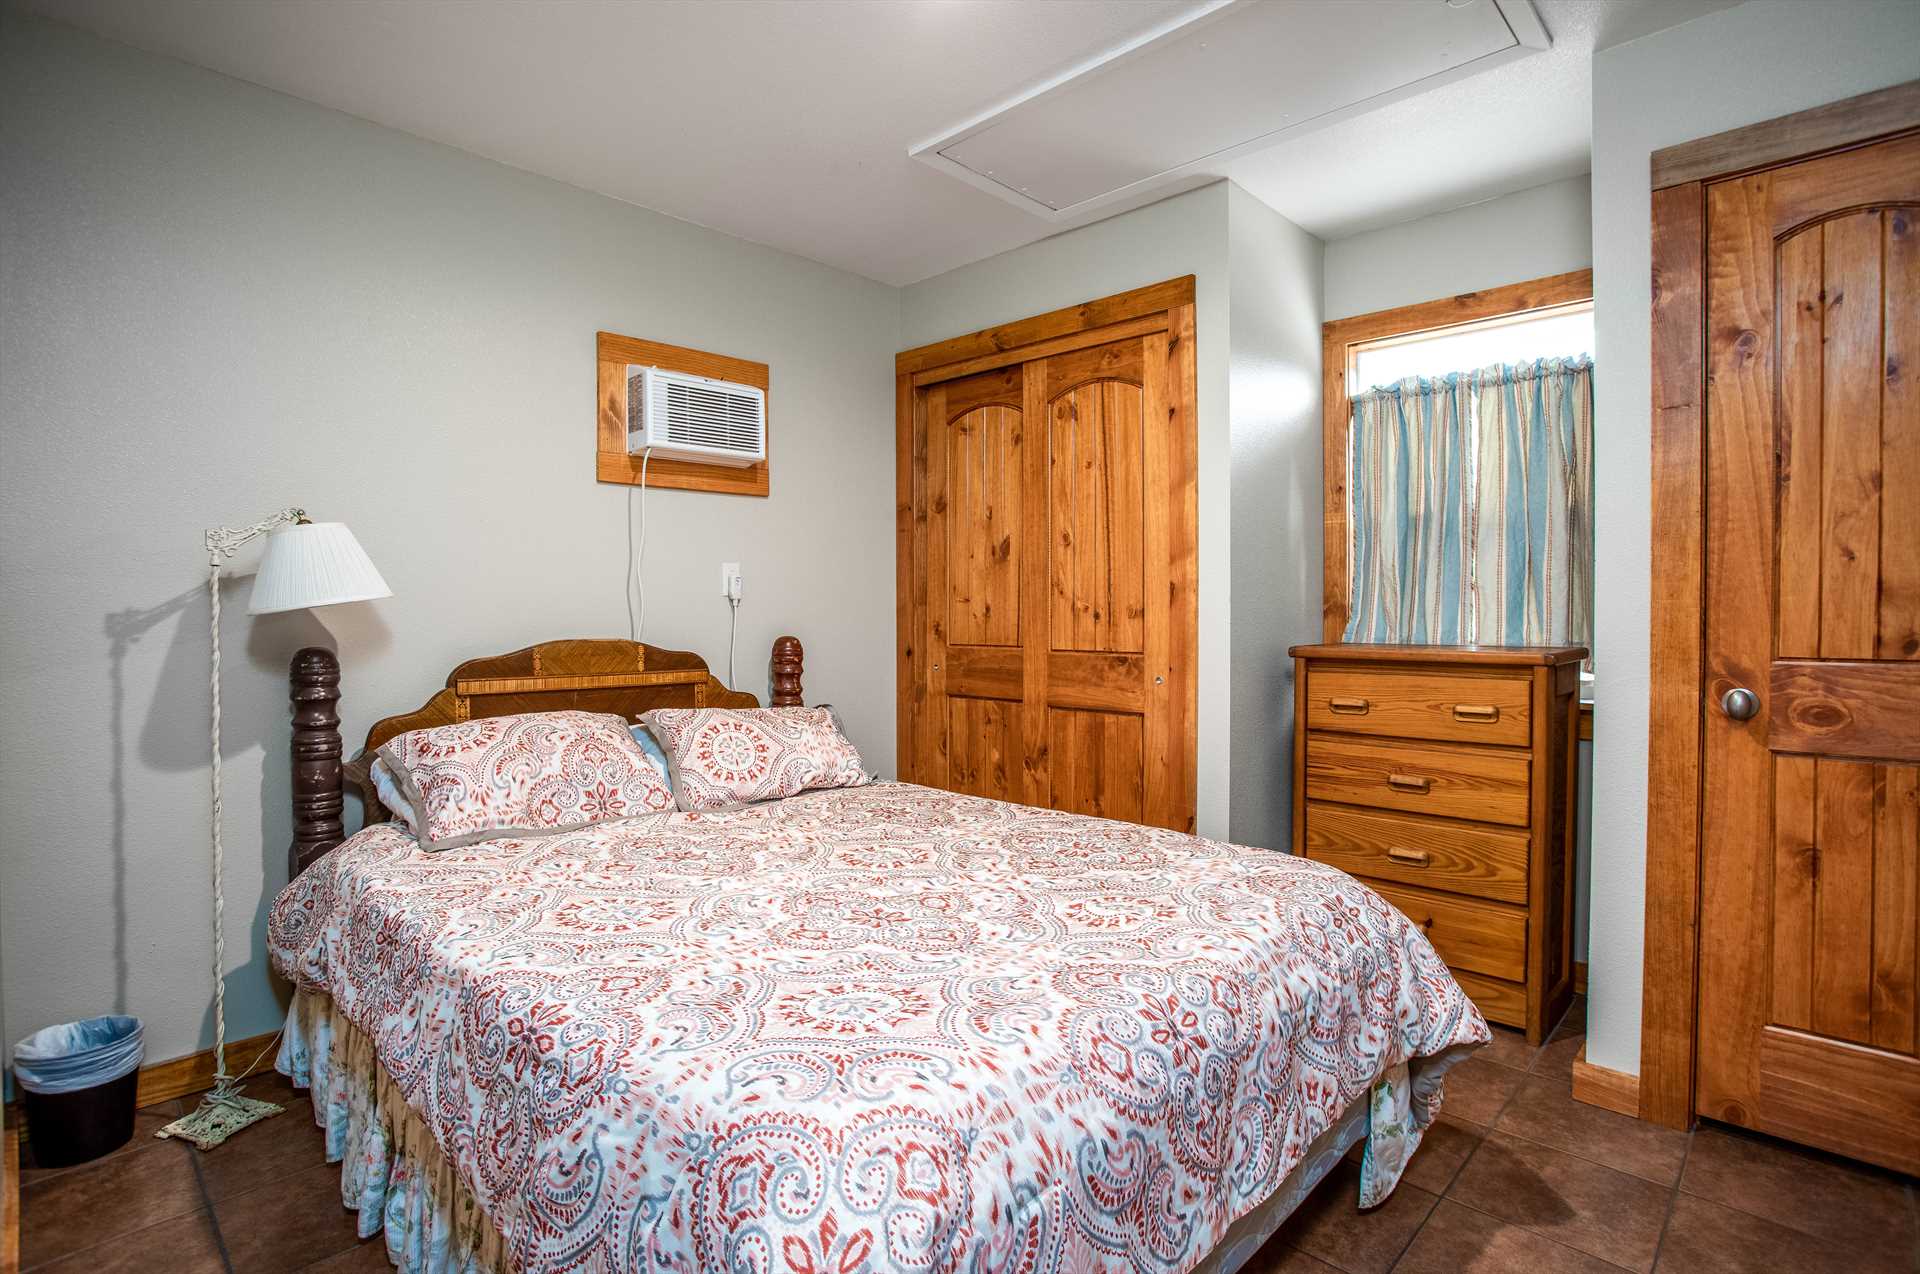                                                 Settle in for a restful night's sleep after an adventurous day in the invigorating Hill Country!